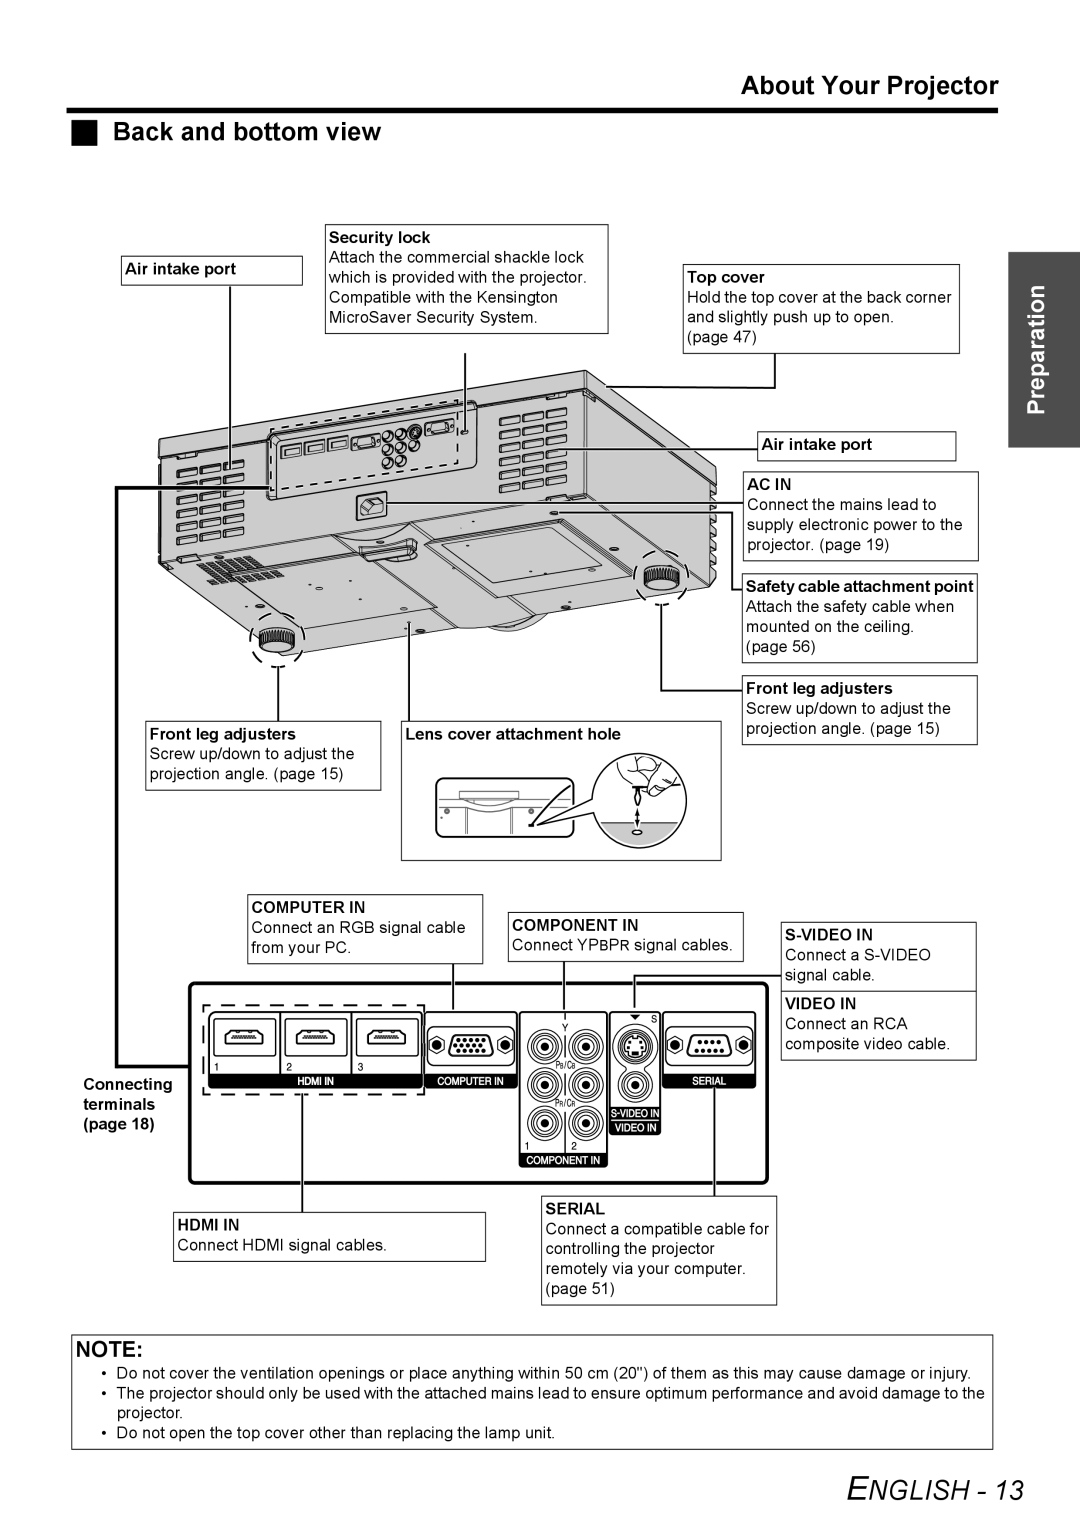 Panasonic PT-AE3000E manual About Your Projector Back and bottom view, English, Preparation, Screw up/down to adjust the 